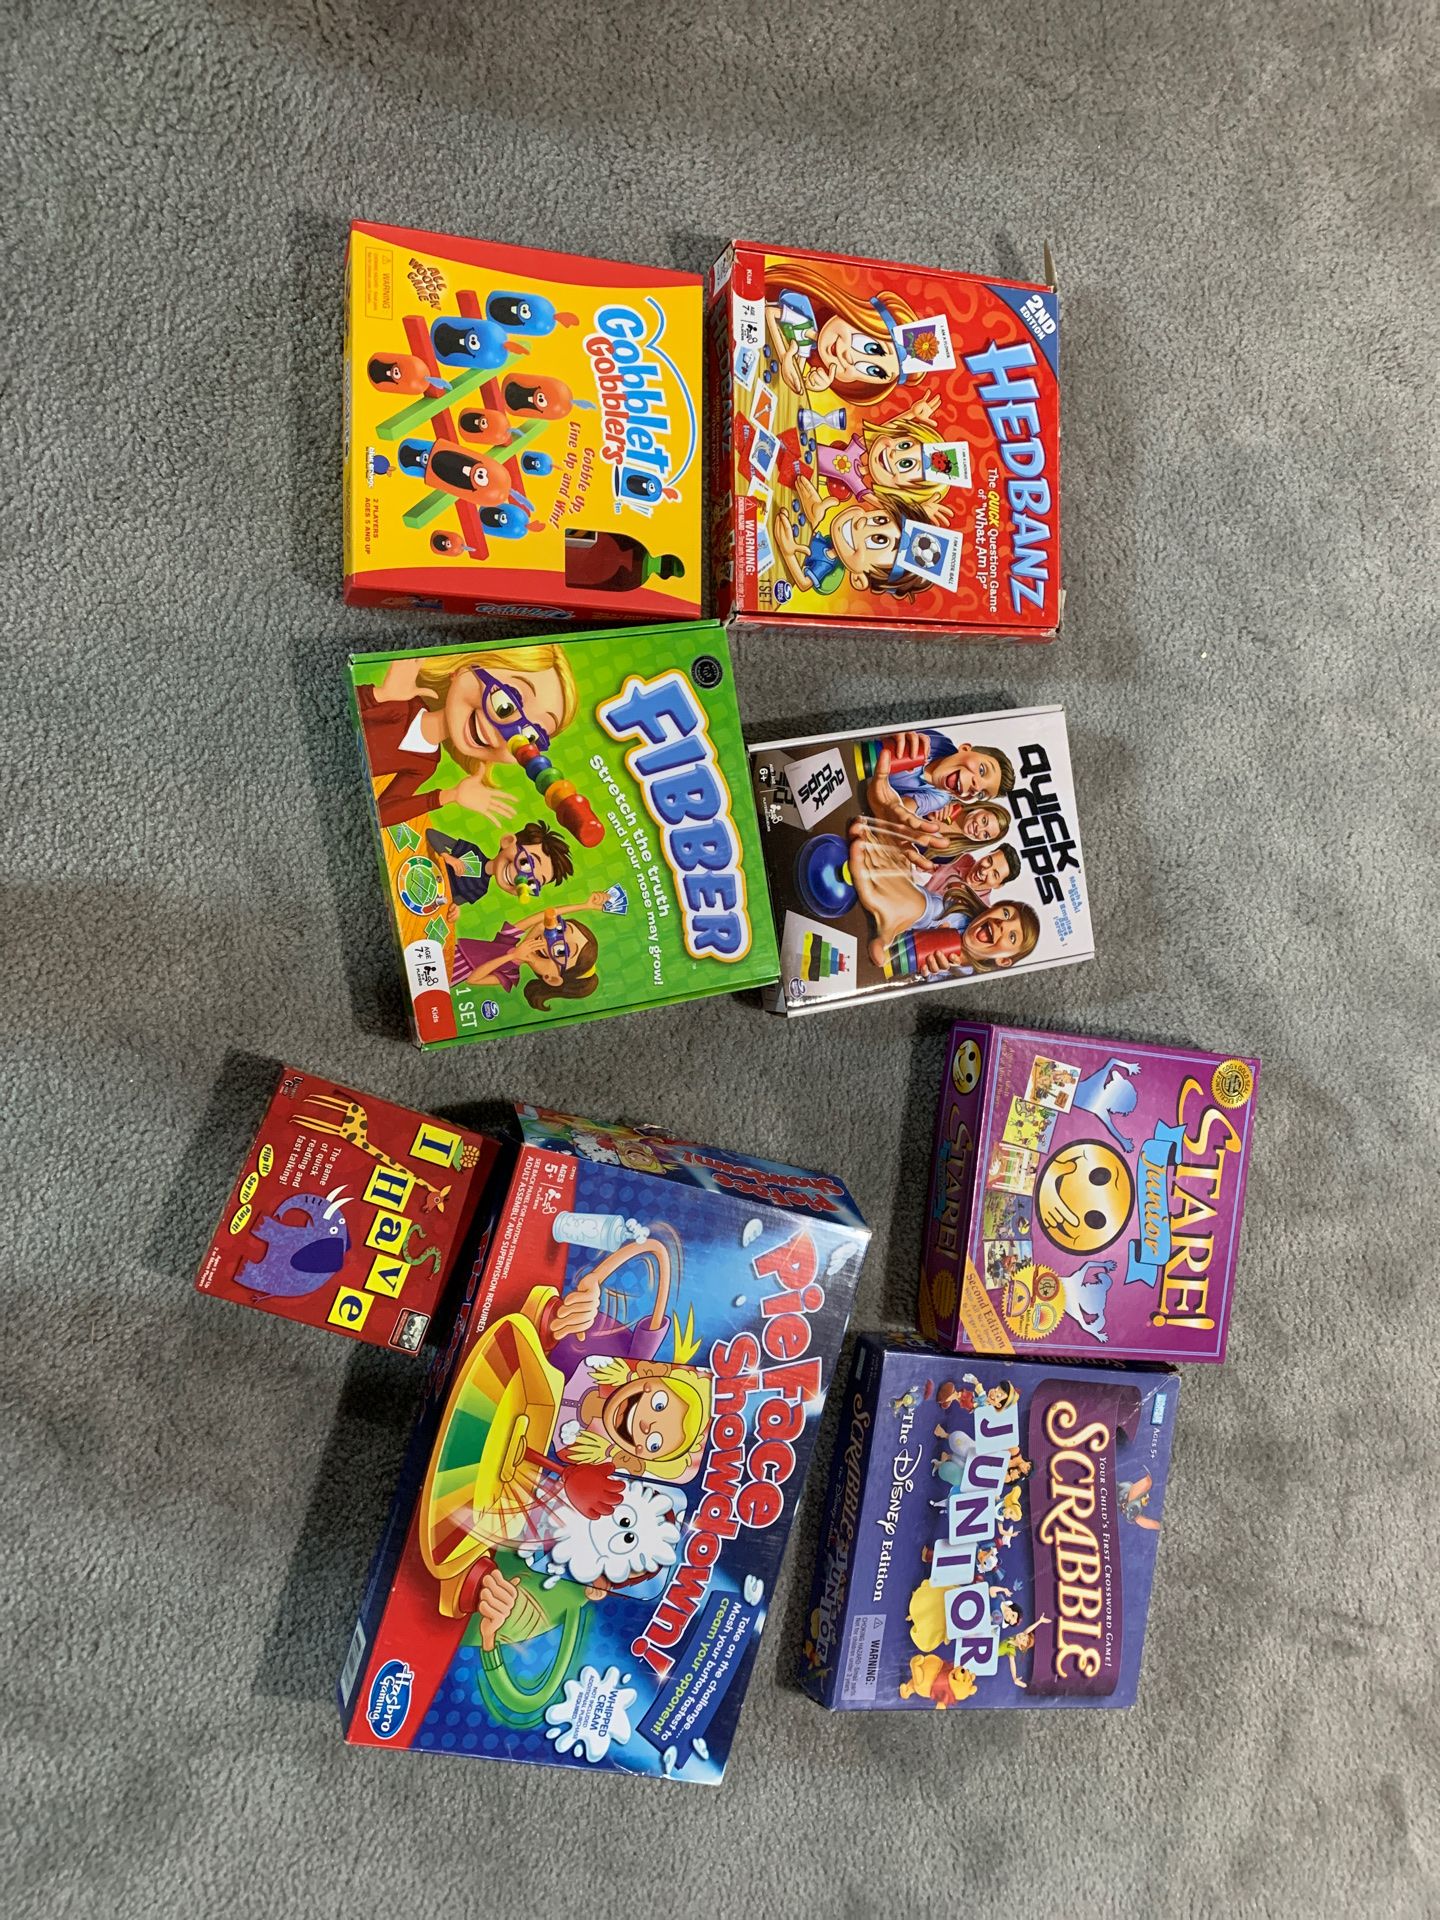 Board Games $10 for all